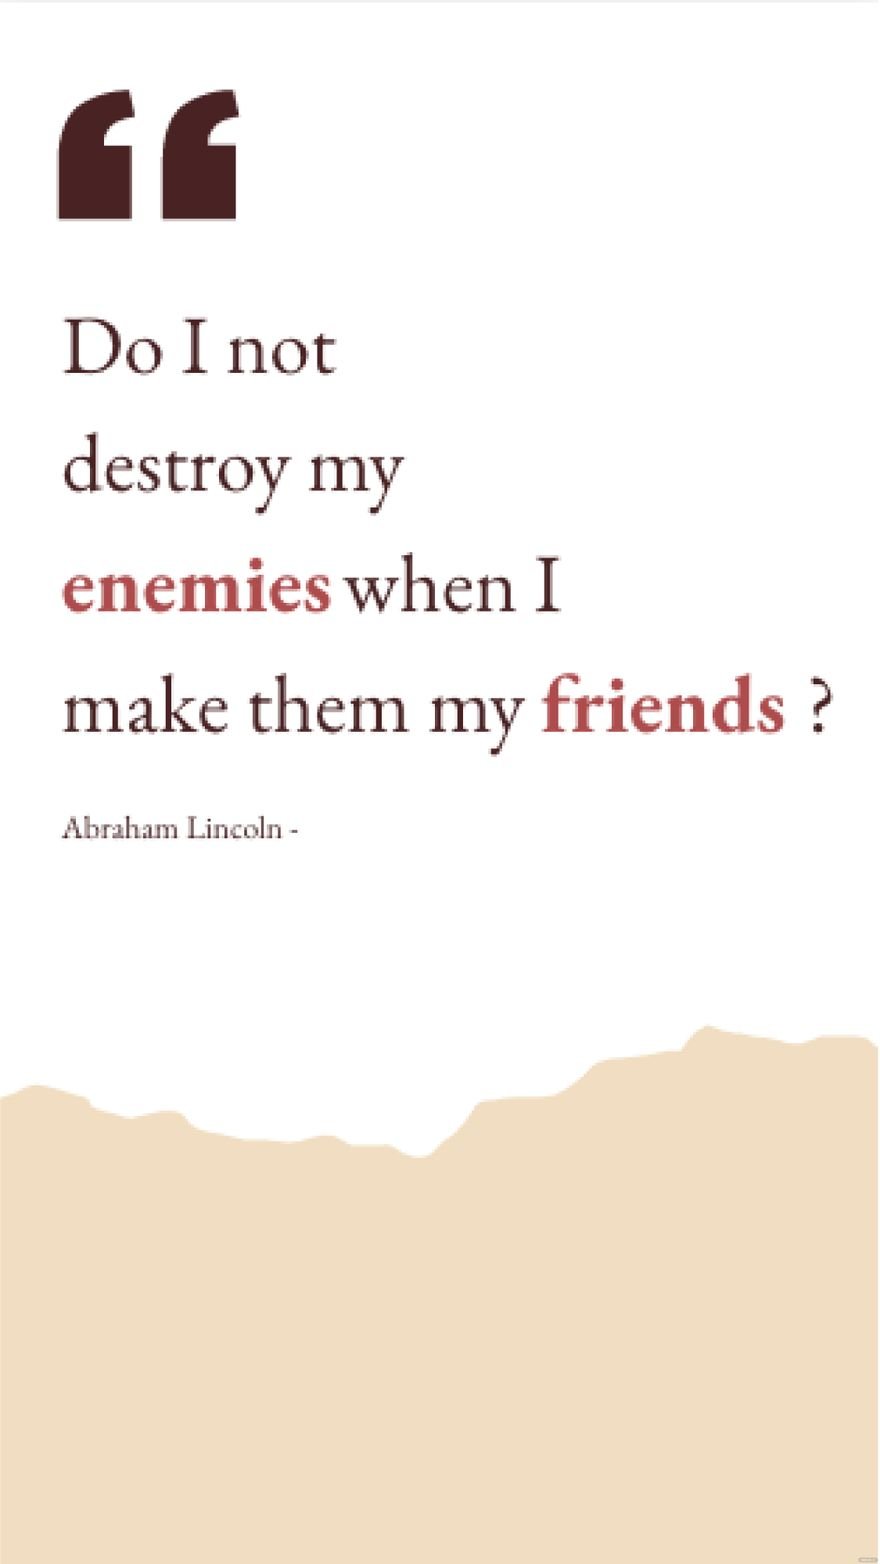 Abraham Lincoln - Do I not destroy my enemies when I make them my friends?